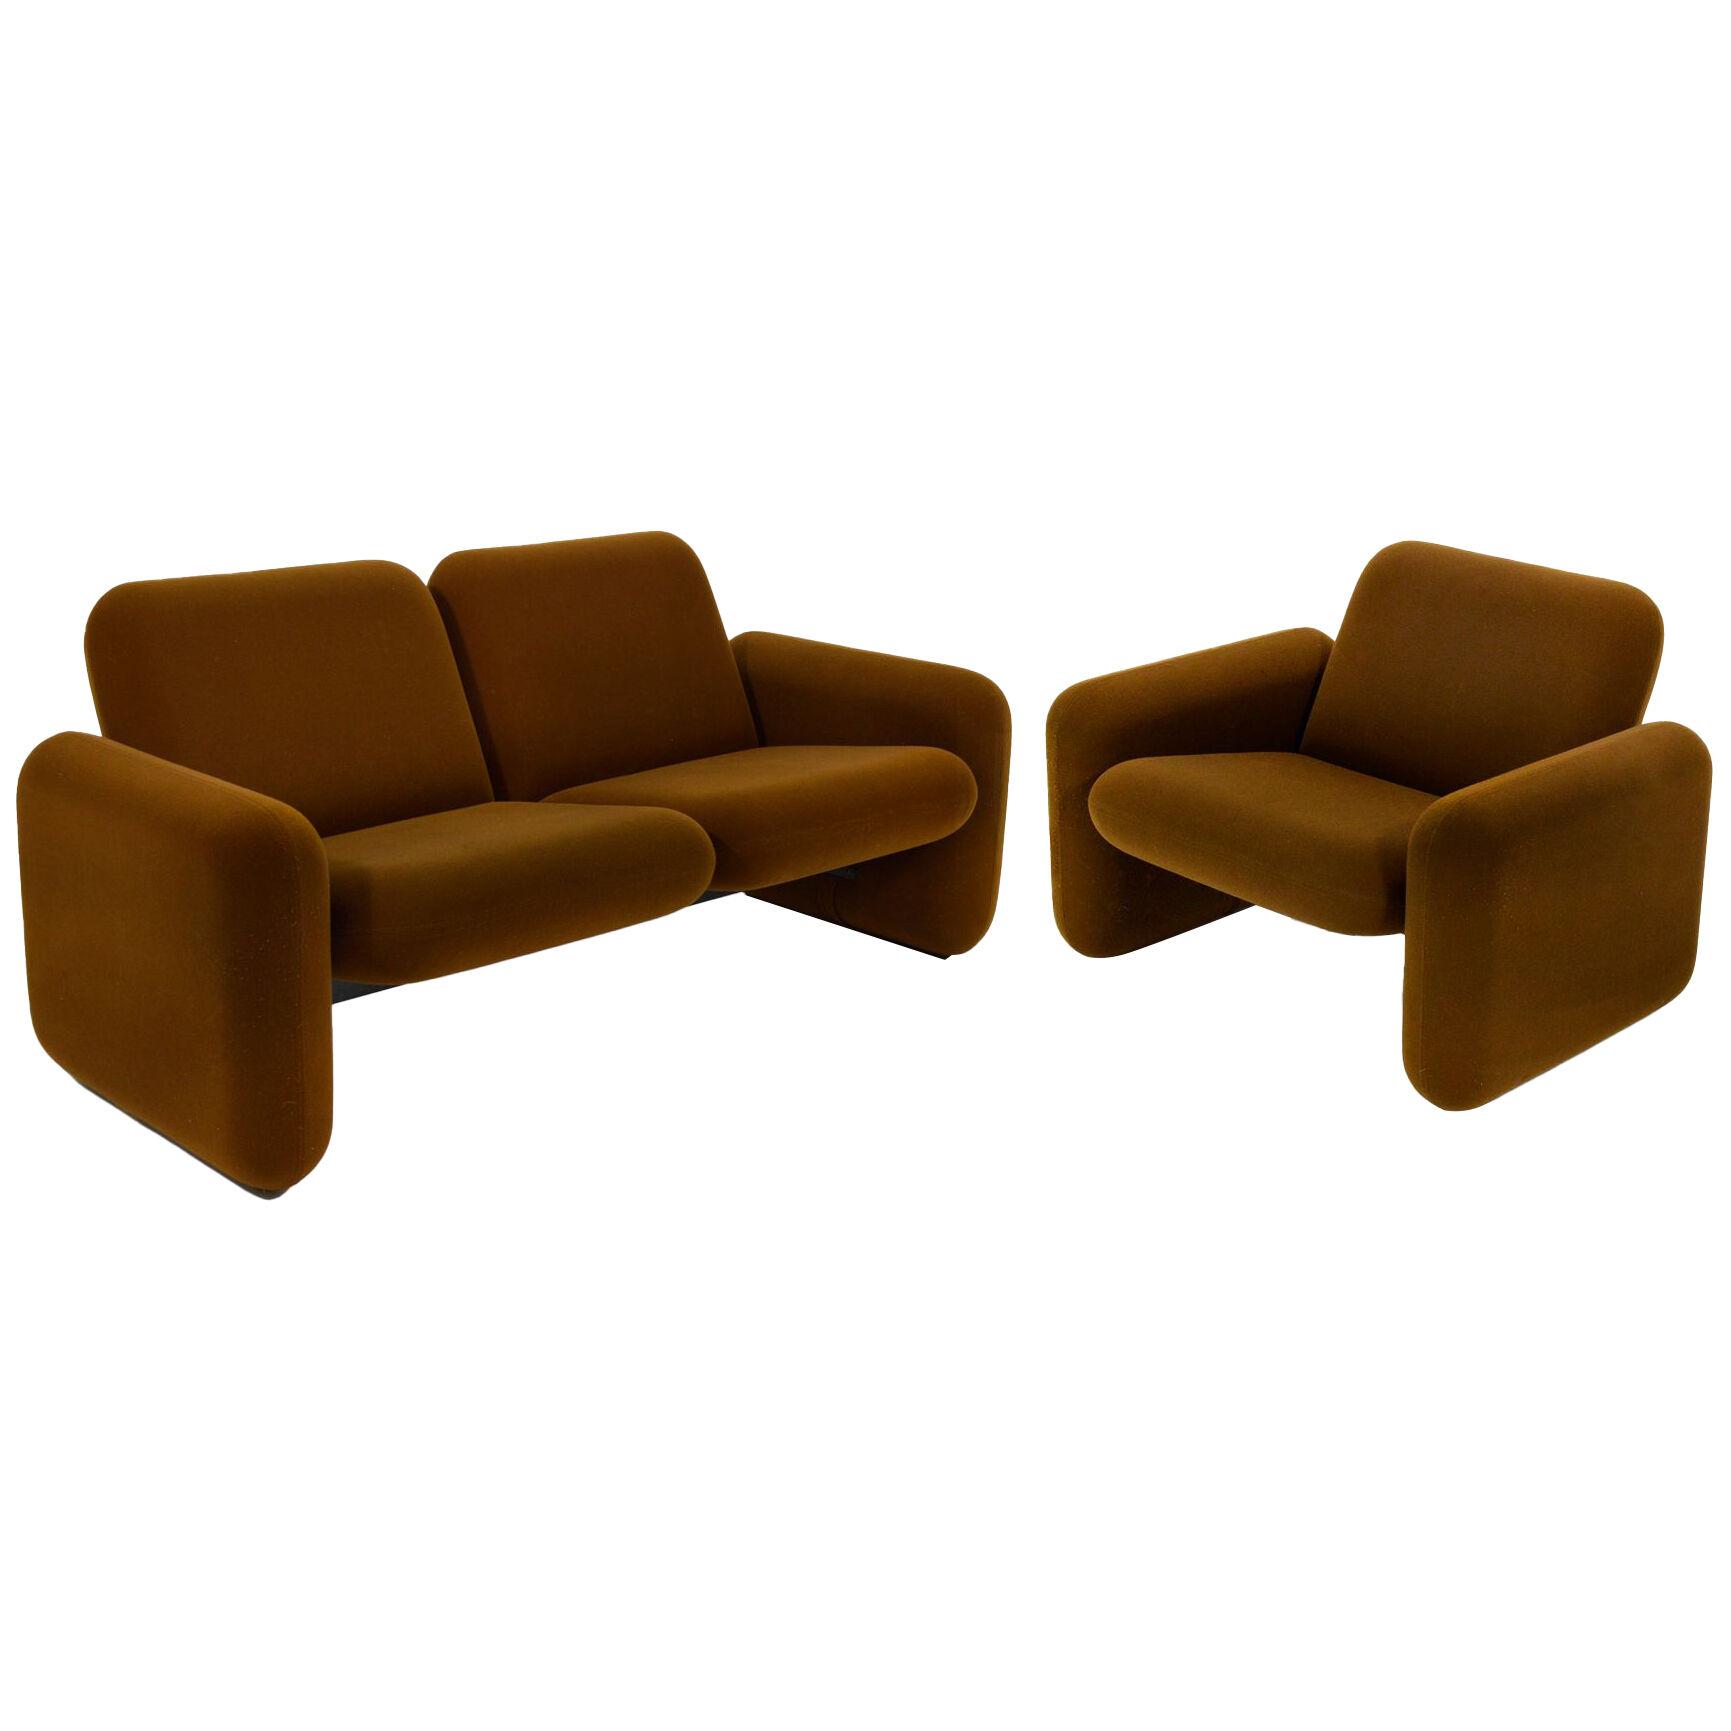 Ray Wilkes "Chiclet" Sofa and Lounge Chair by Herman Miller